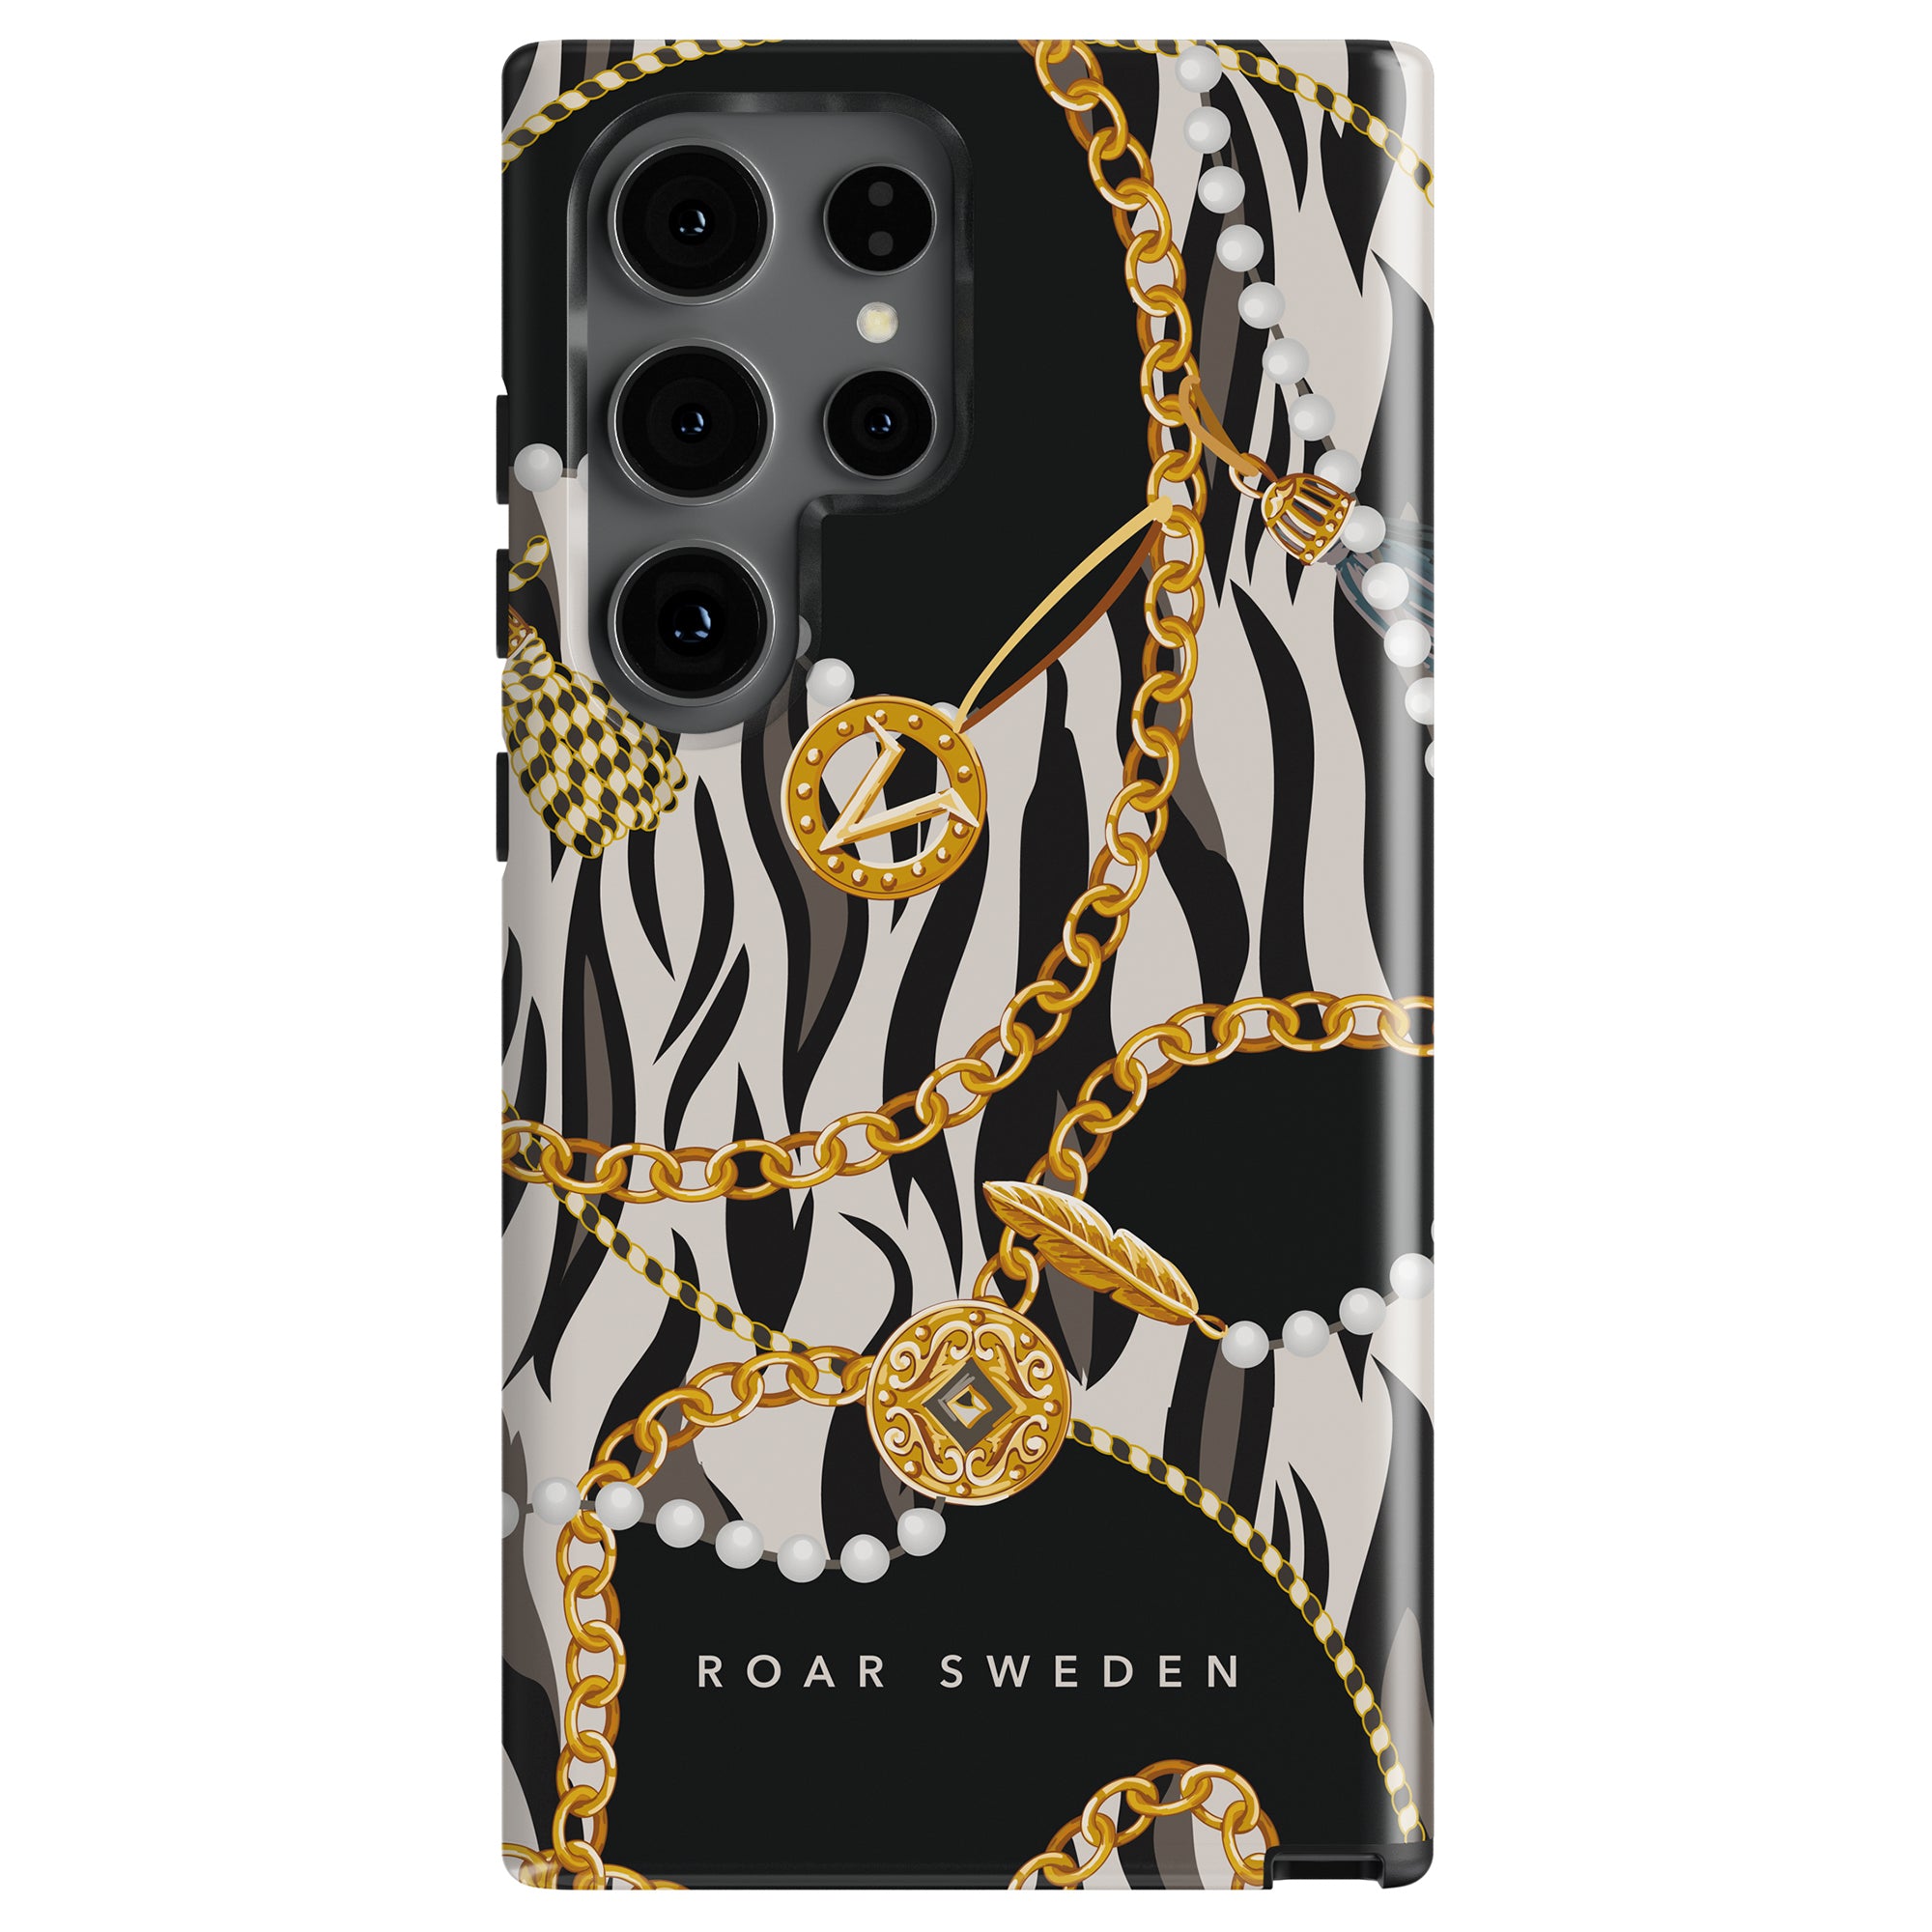 A Bling - Tough Case, this smartphone accessory boasts a zebra djurmönster adorned with gold chains, pearls, and a gold charm. The text "ROAR SWEDEN" is printed at the bottom for an added touch of chic.